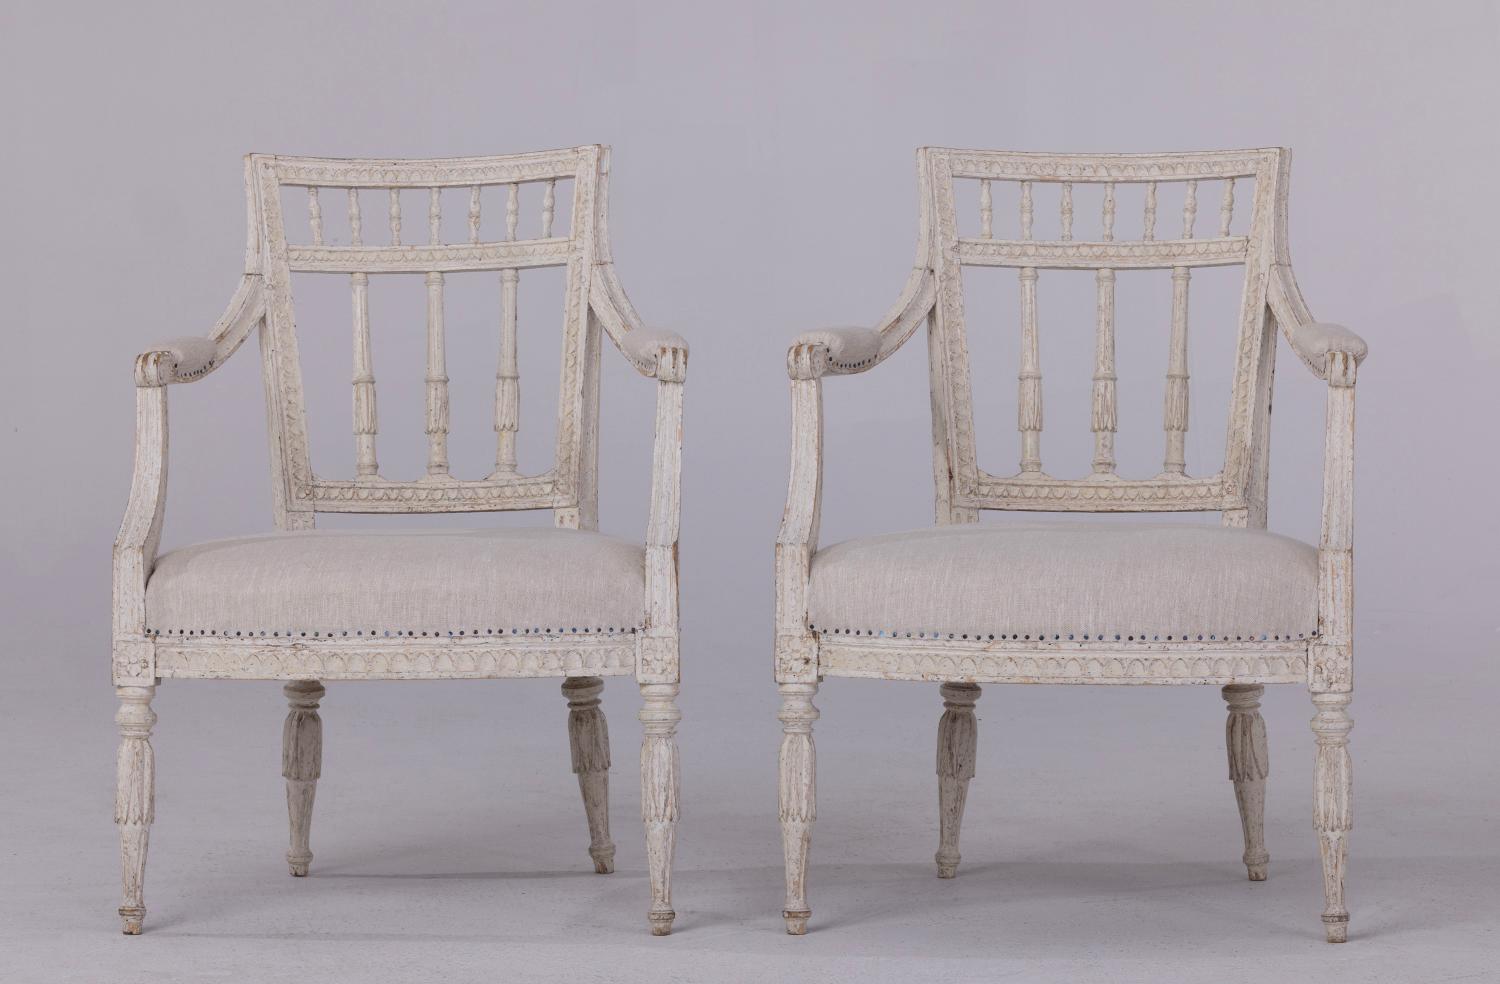 A pair of Gustavian period armchairs with provenance, signed by master craftsman, Johan Erik Höglander, Stockholm 1777-1813. Considered to be one of Sweden's best chair makers during the 18th century. These beautiful chairs have been hand-scraped to